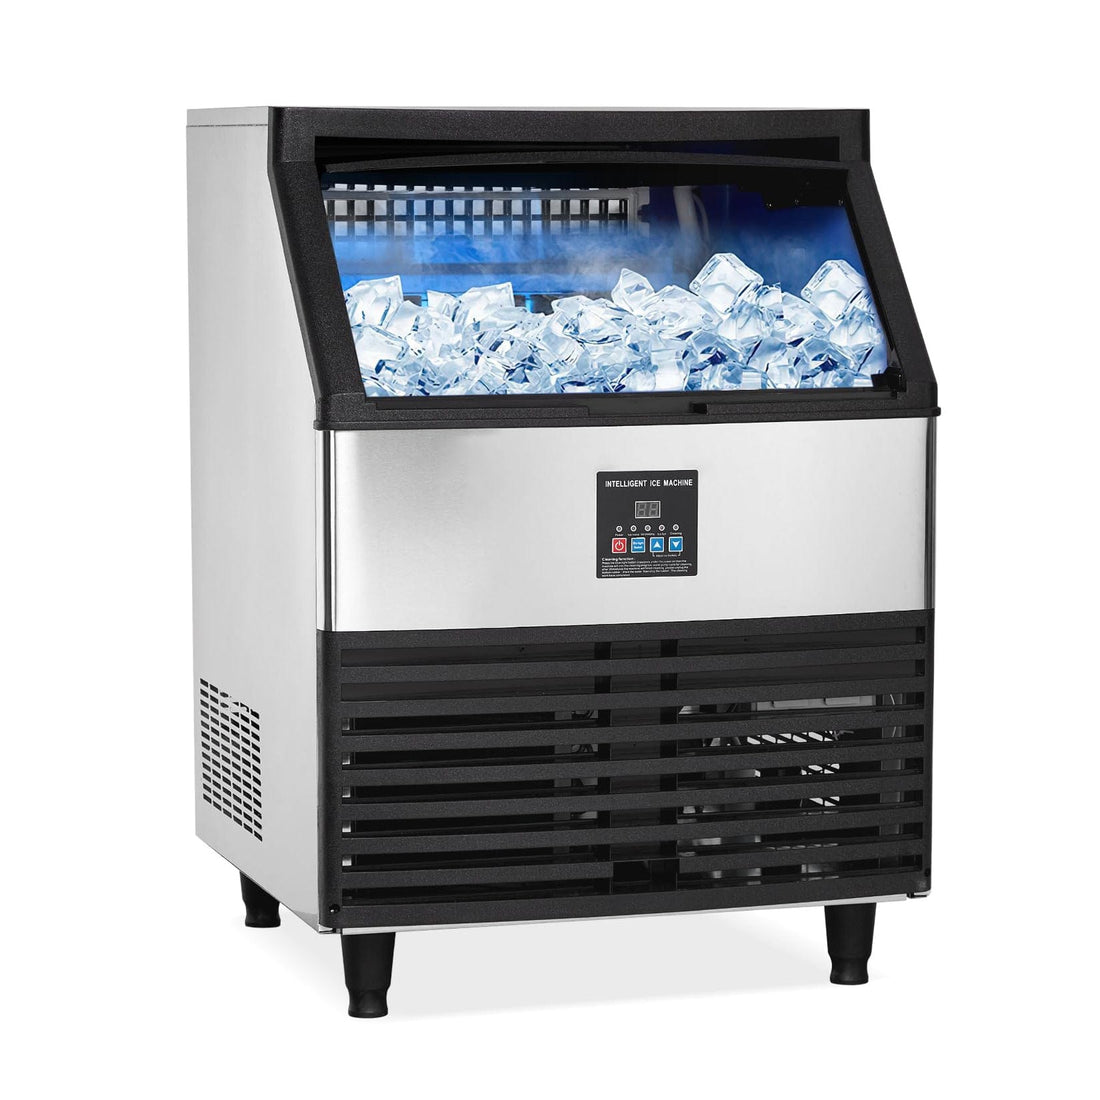 GARVEE 300LBS/24H, Commercial Ice Maker, 100lbs Storage, Stainless Steel, Under Counter, Clear Ice for Restaurants Home, Bar, School Clear Ice Cubes